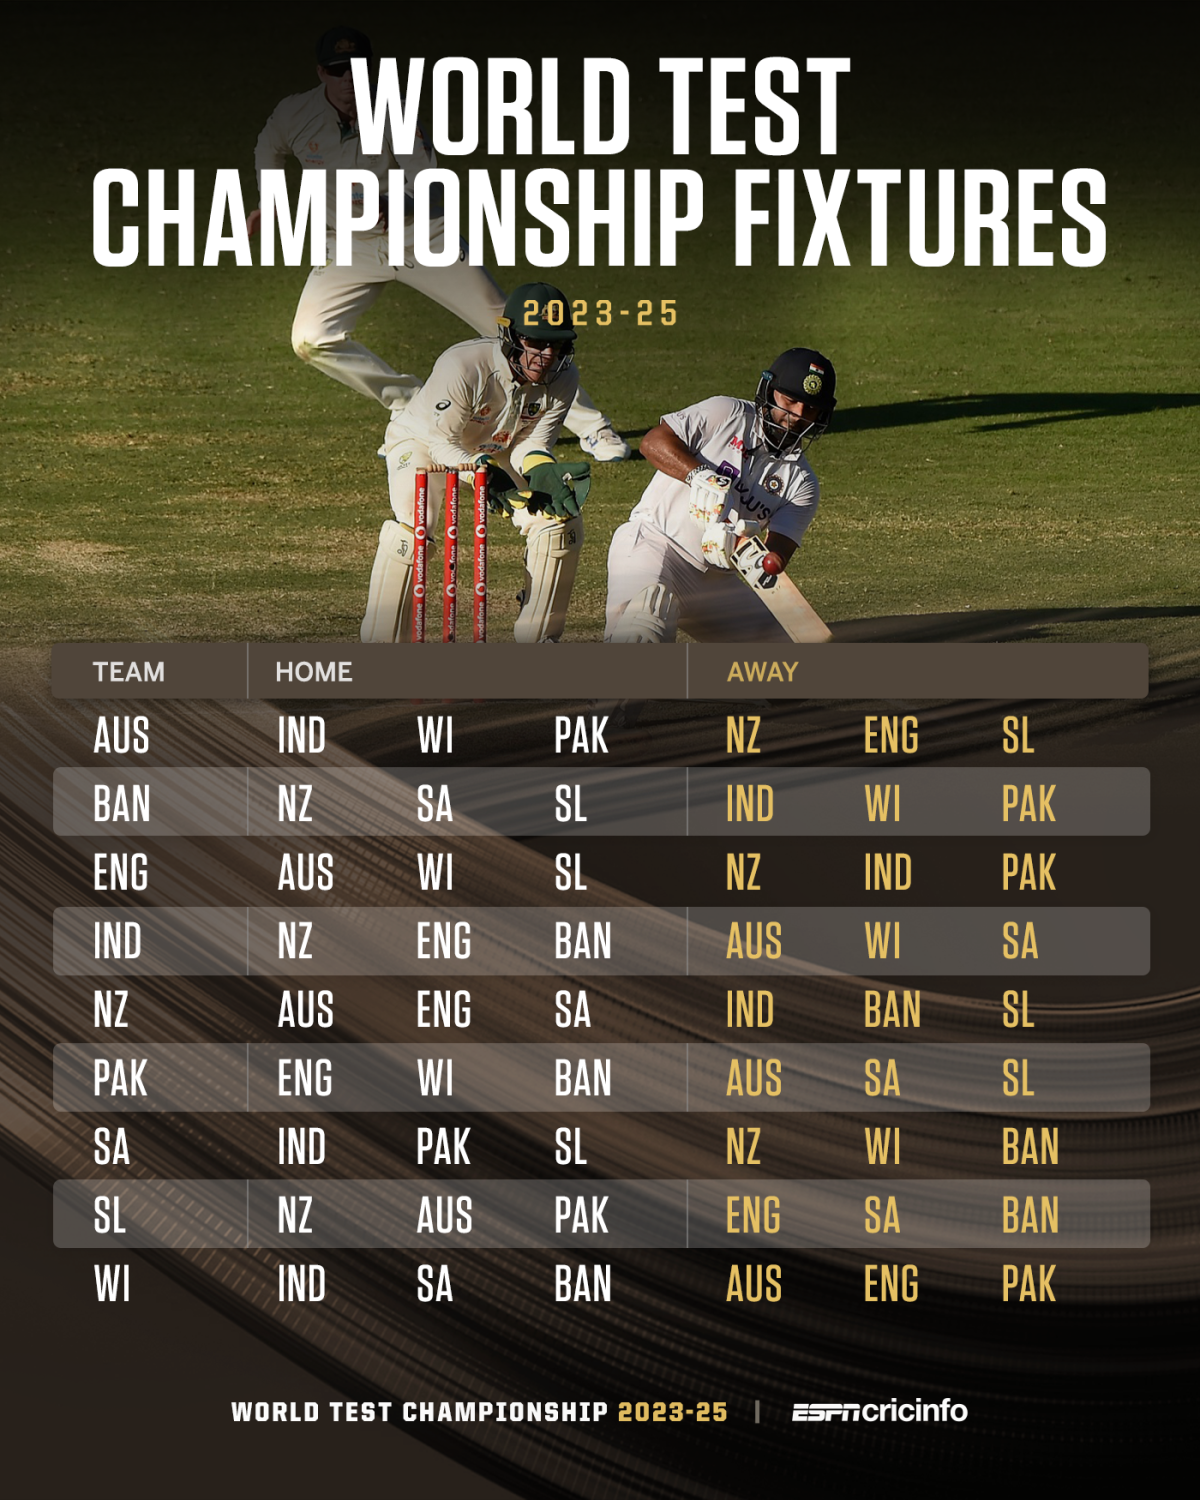 The World Test Championship fixtures for the 202325 cycle